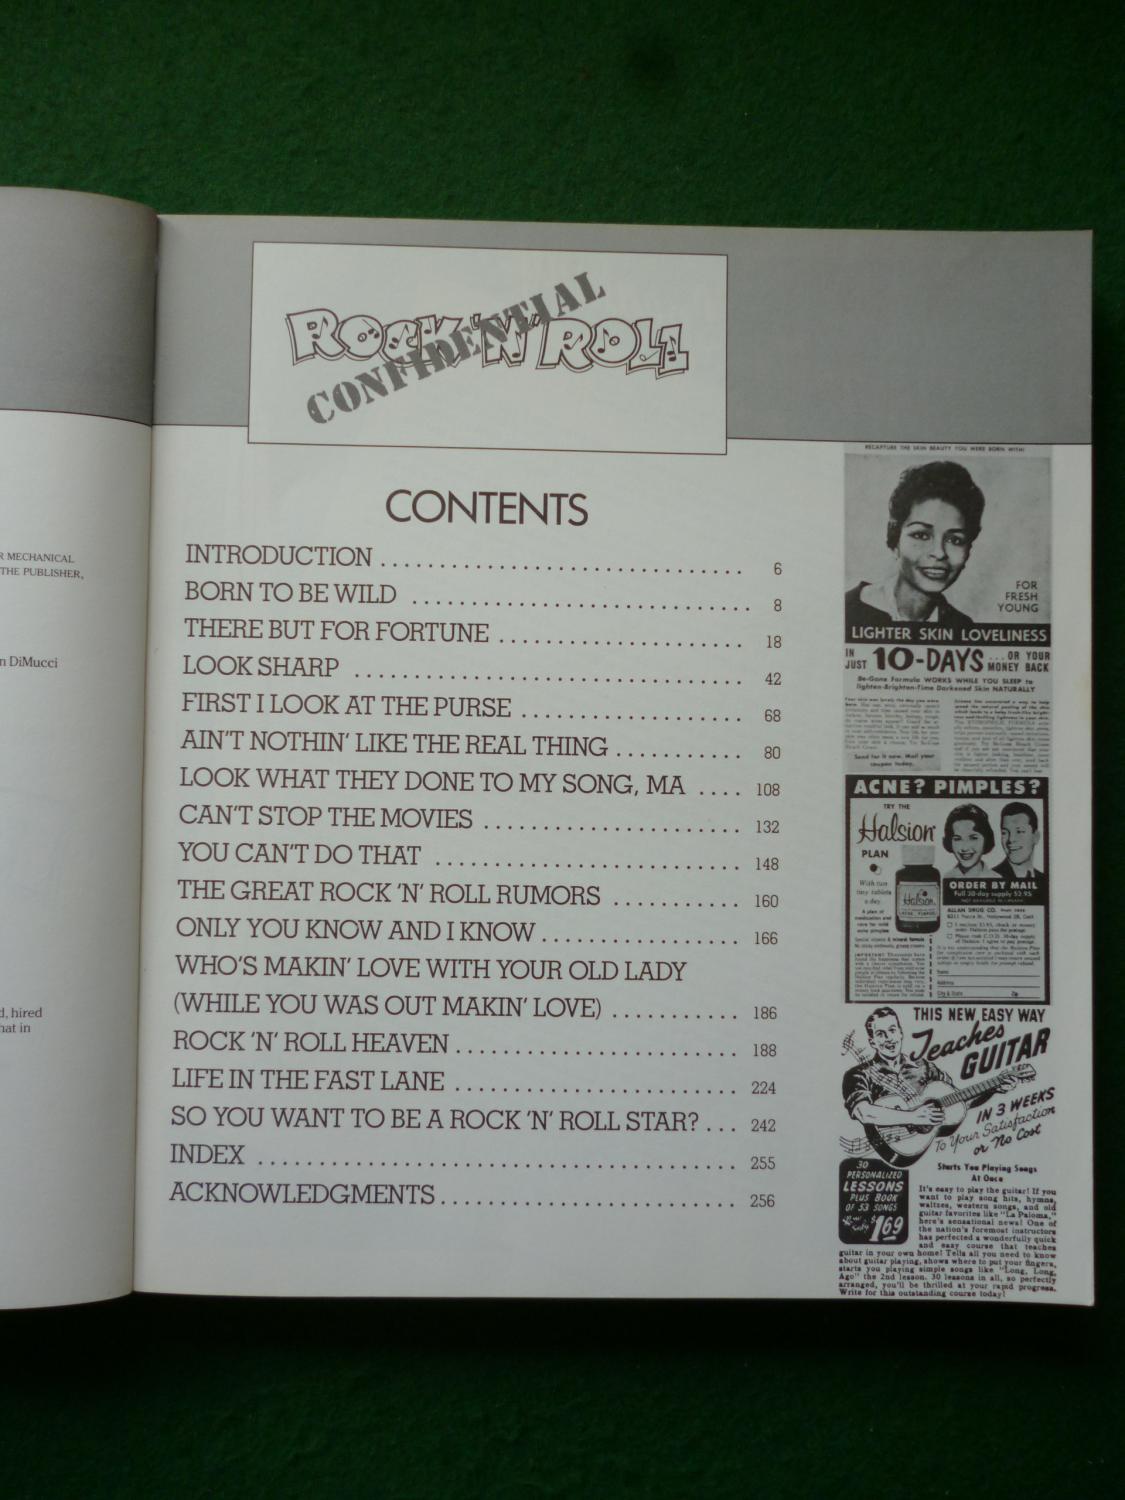 Rock 'n' Roll Confidential by Penny Stallings - Paperback - First Edition -  1984 - from MW Books Ltd. (SKU: 84493)